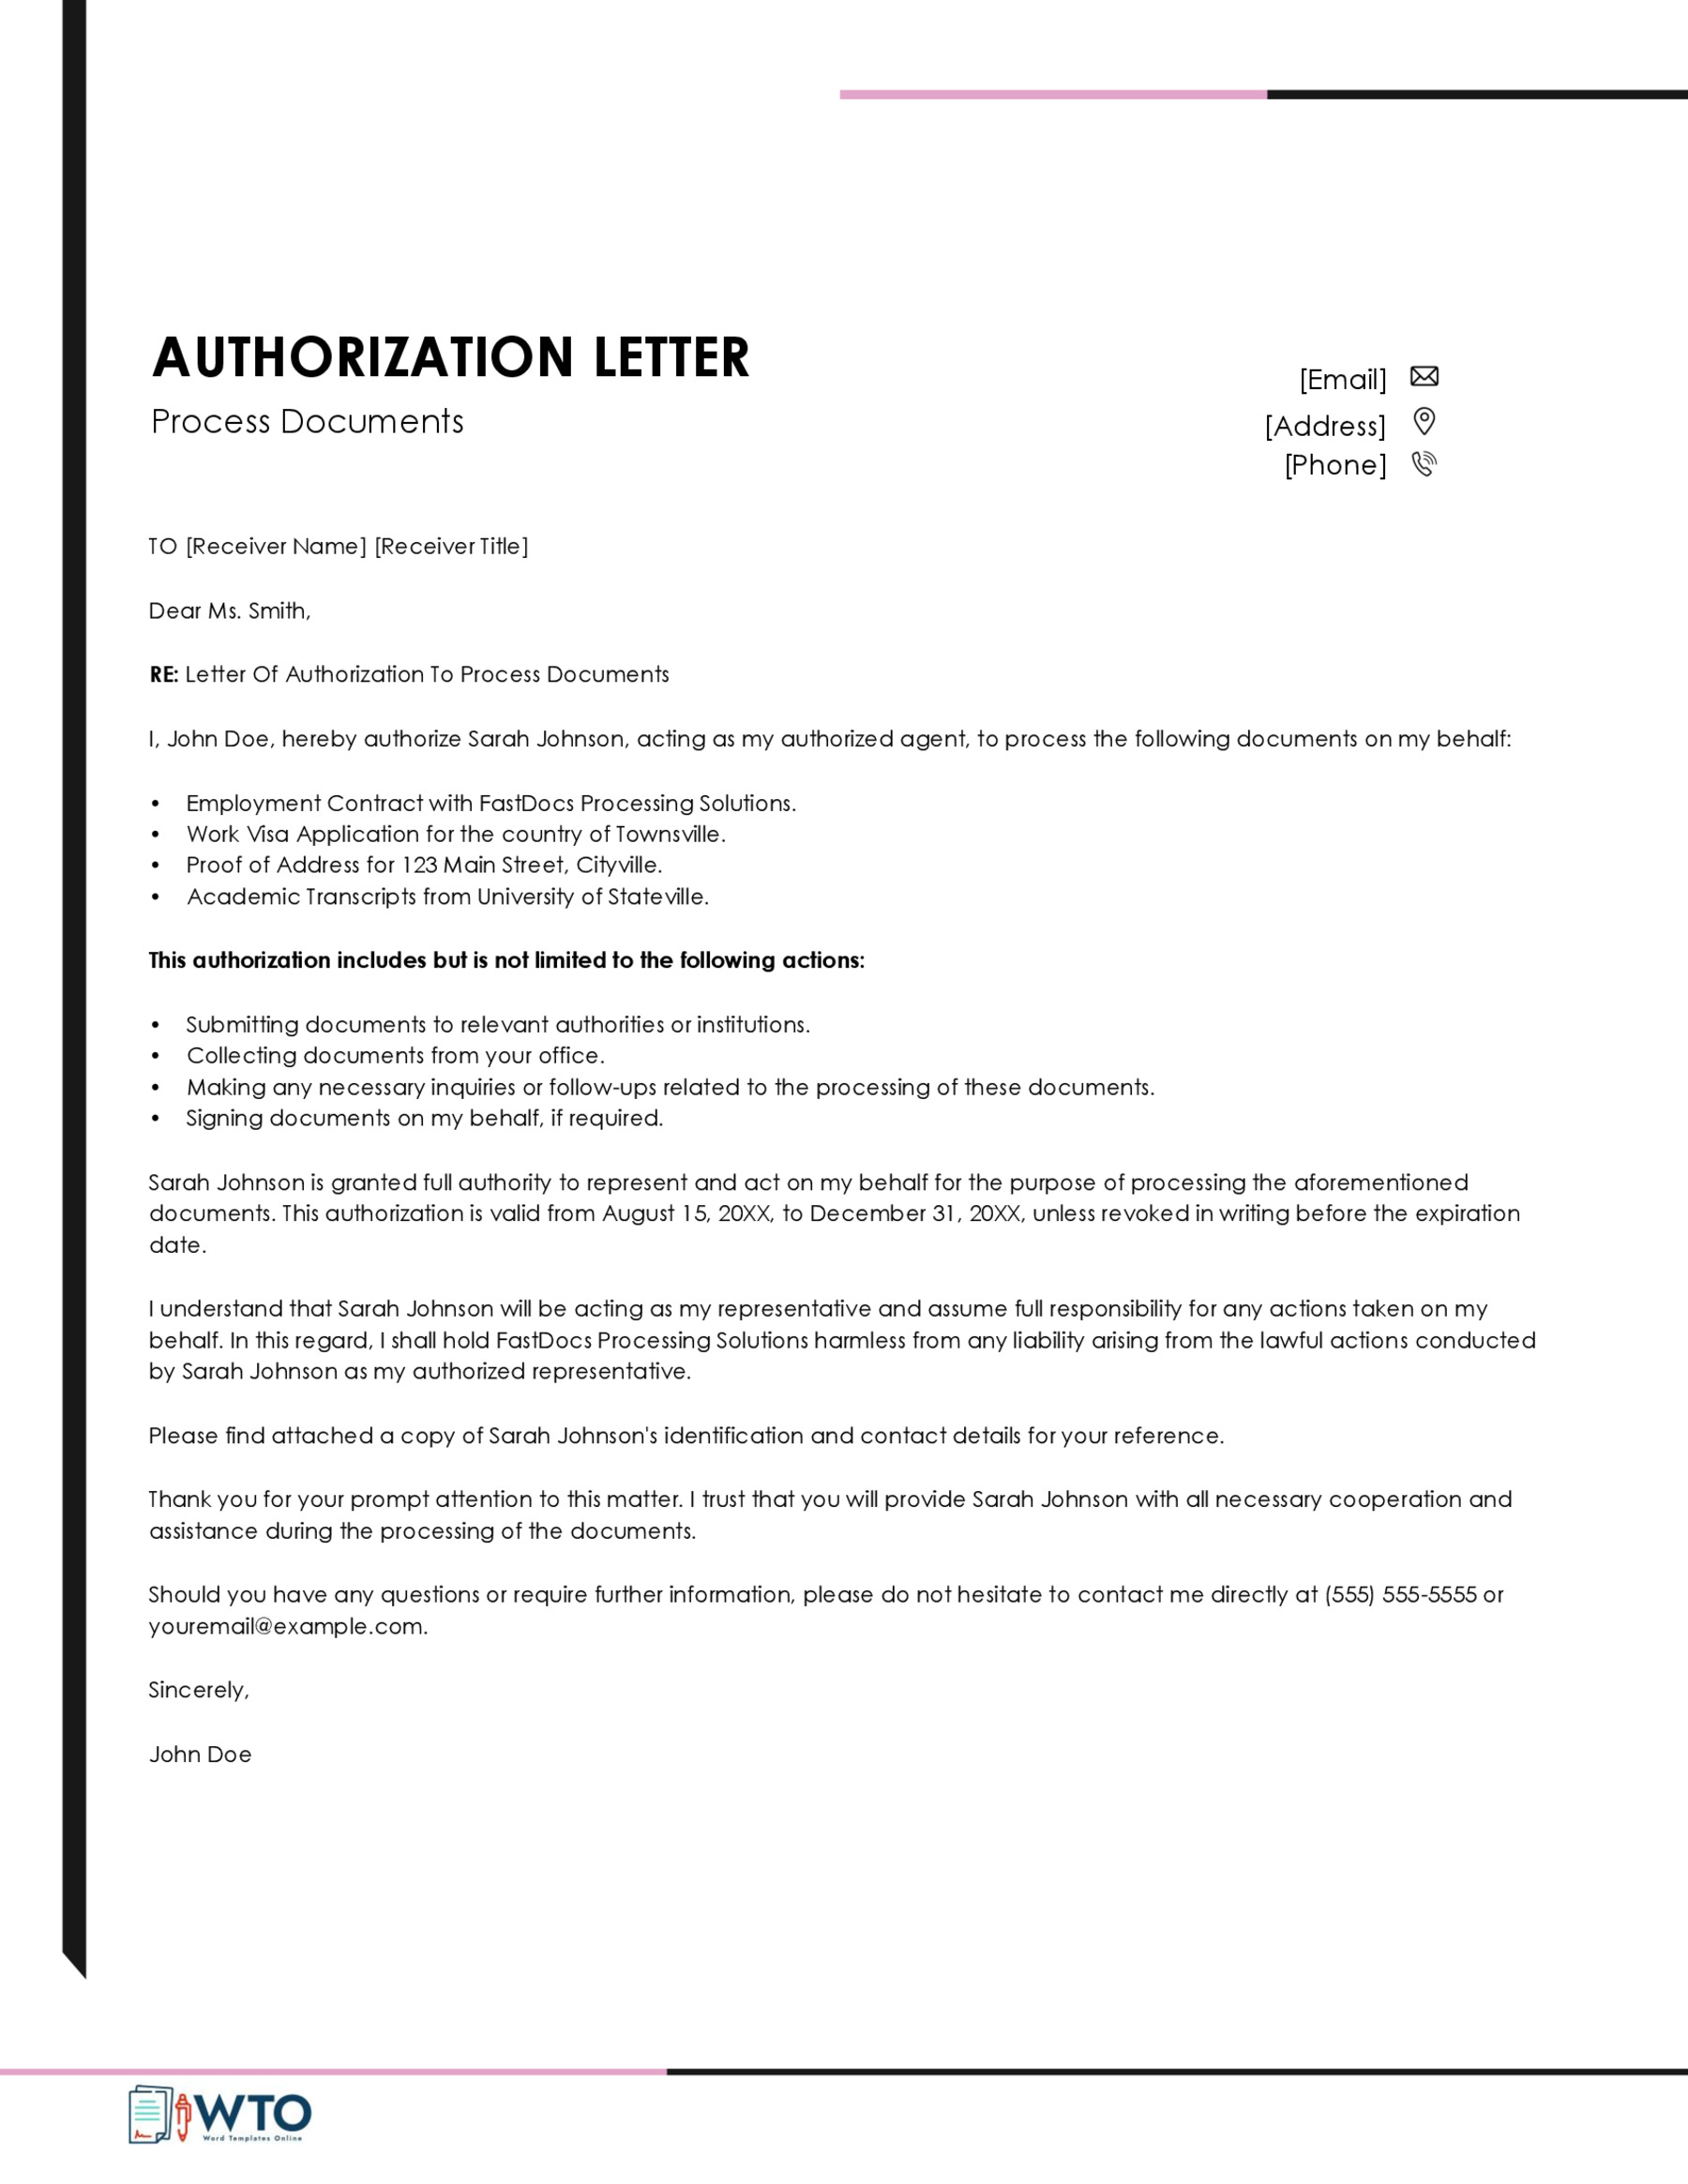 Letter of Giving Permission to Process Documents Sample in word format free download